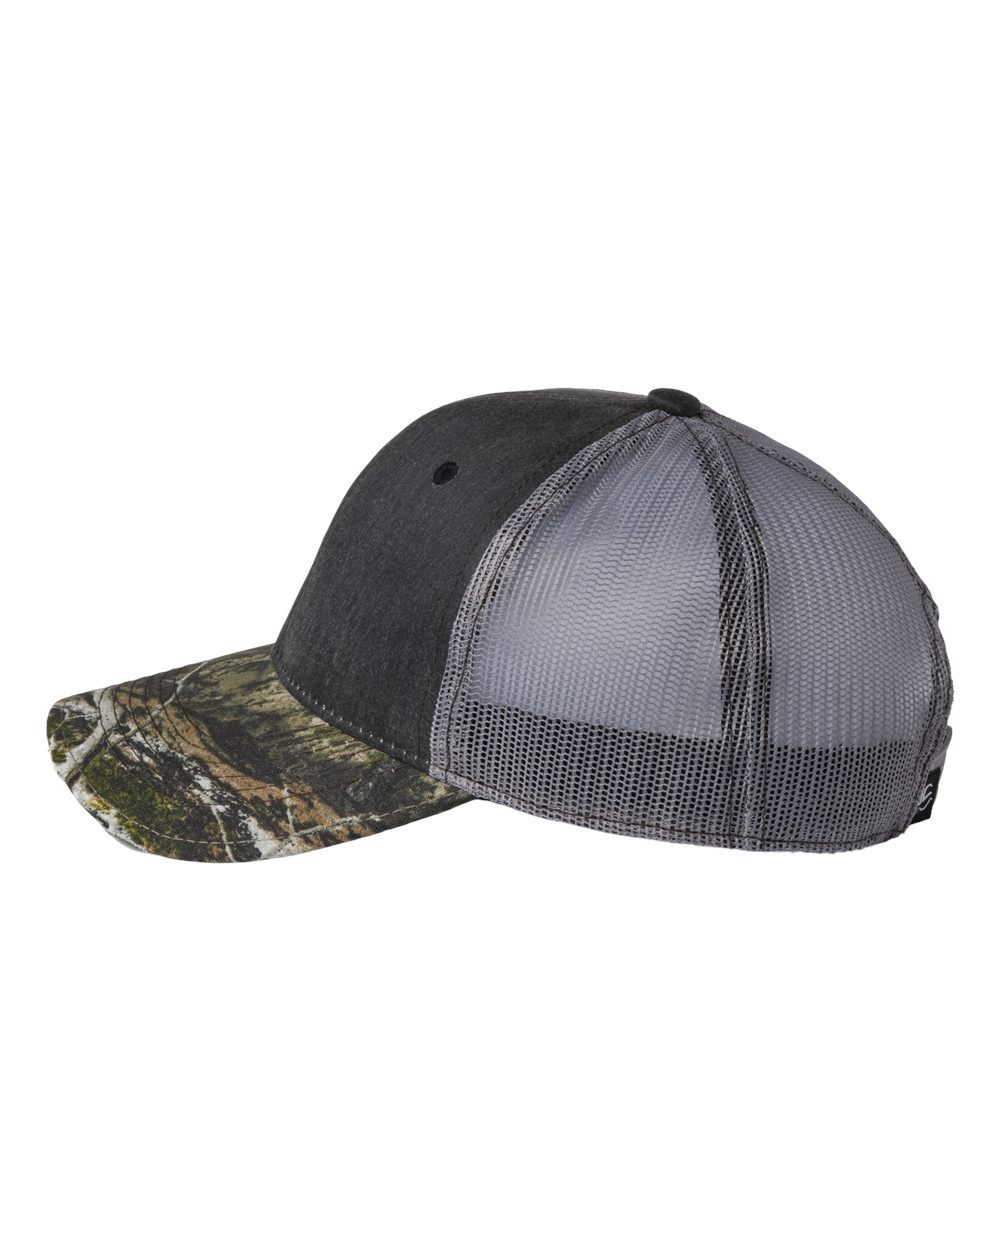 Distressed Camo Mesh-Back Cap - Black/Country DNA/Grey